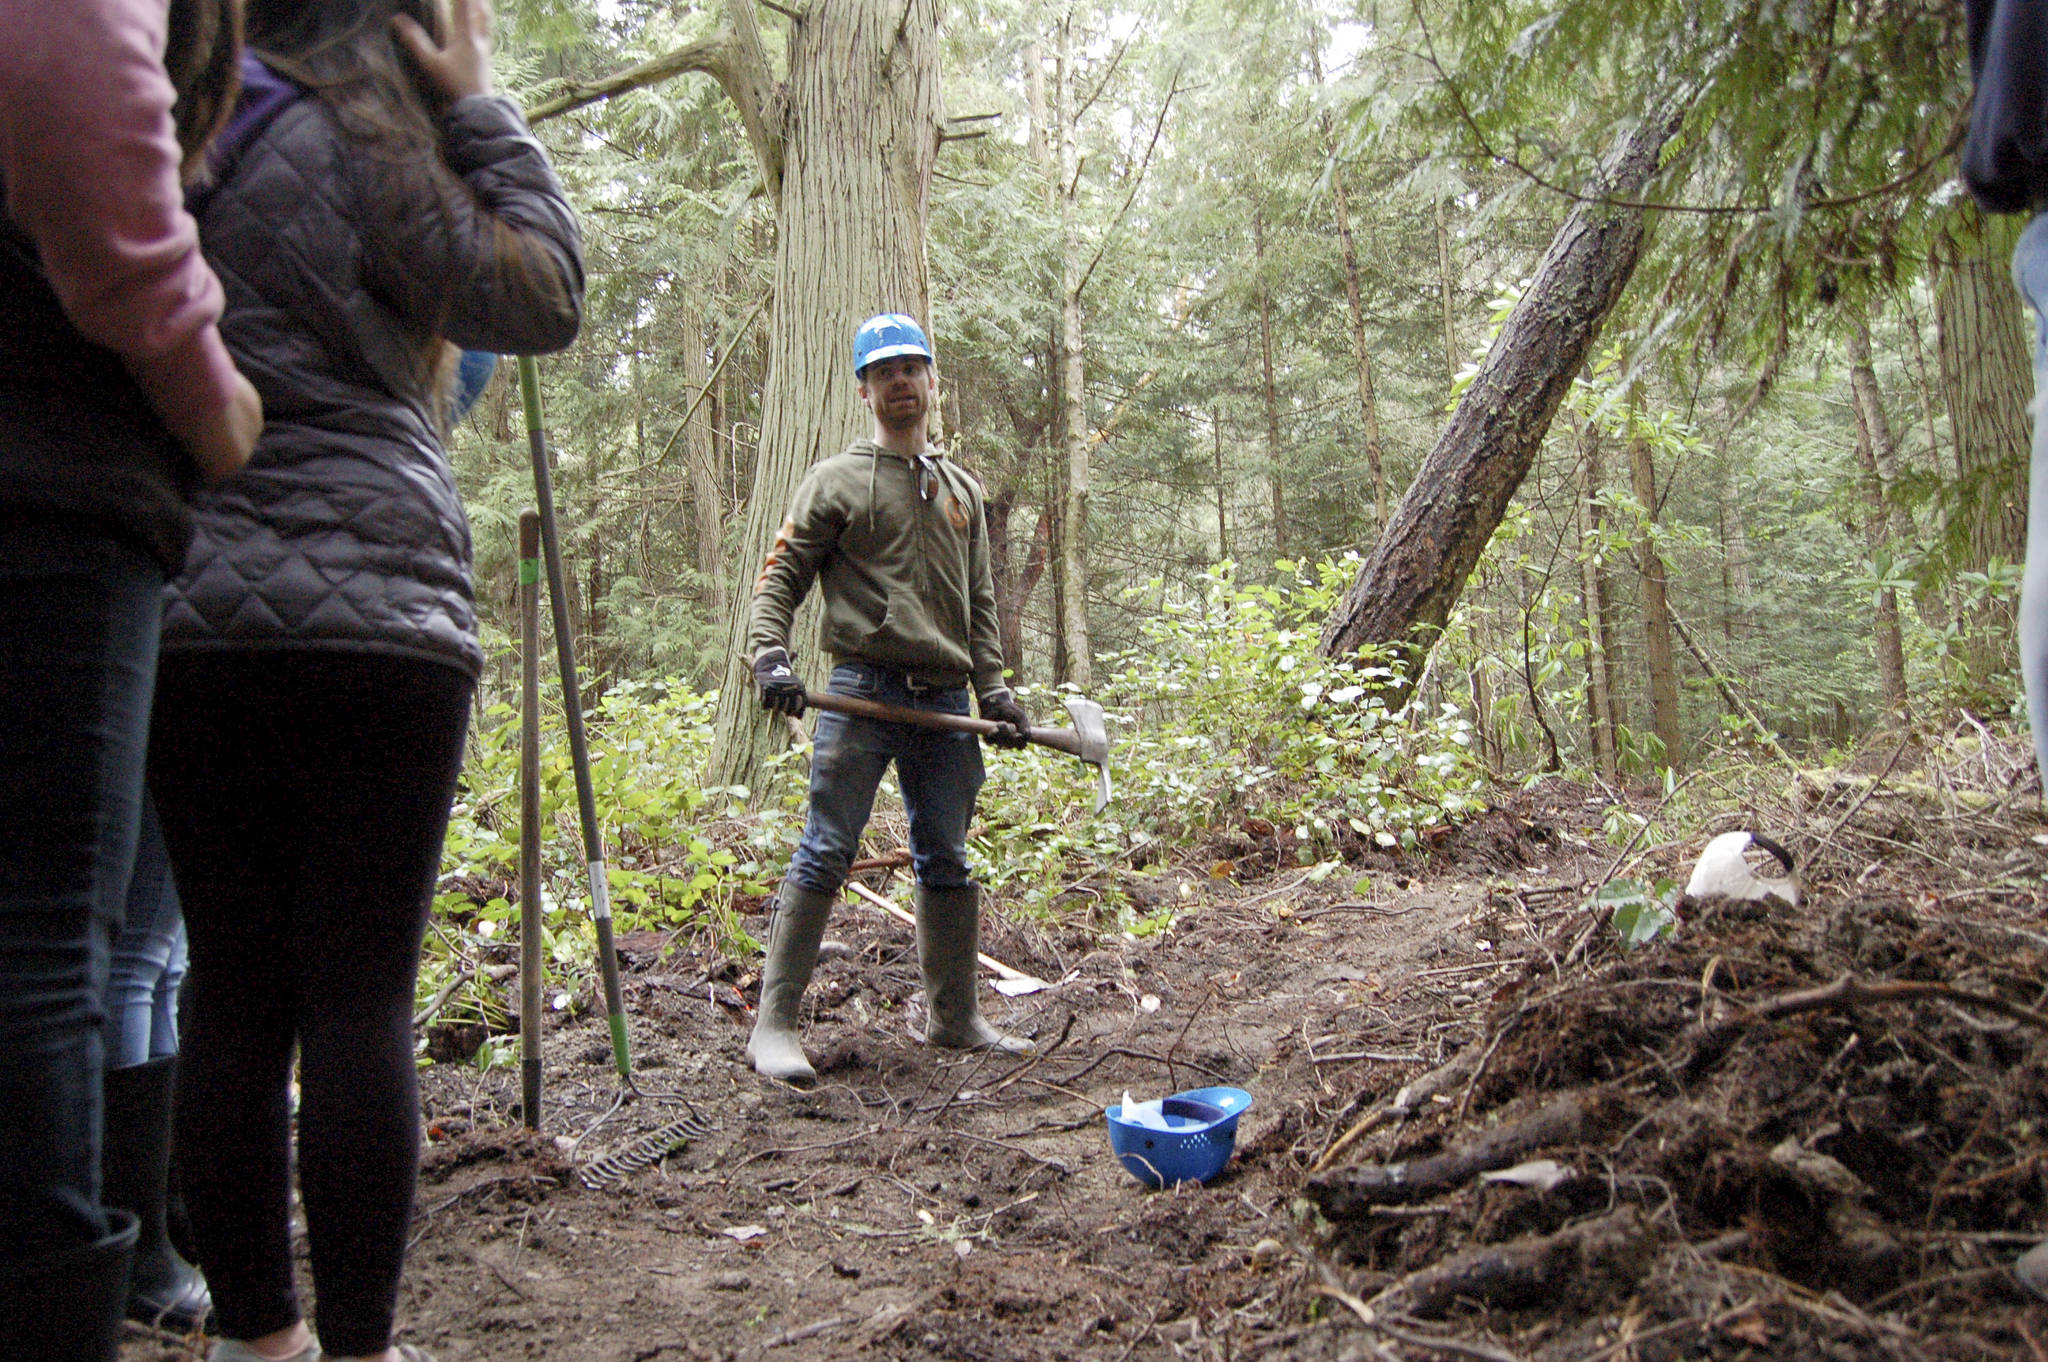 Powell Jones, executive director of the Dungeness River Audubon Center, shows students how to use tools like a McLeod for clearing trails. Each student got to try different tools as they worked to clear a trail over a few hours last week. (Matthew Nash/Olympic Peninsula News Group)